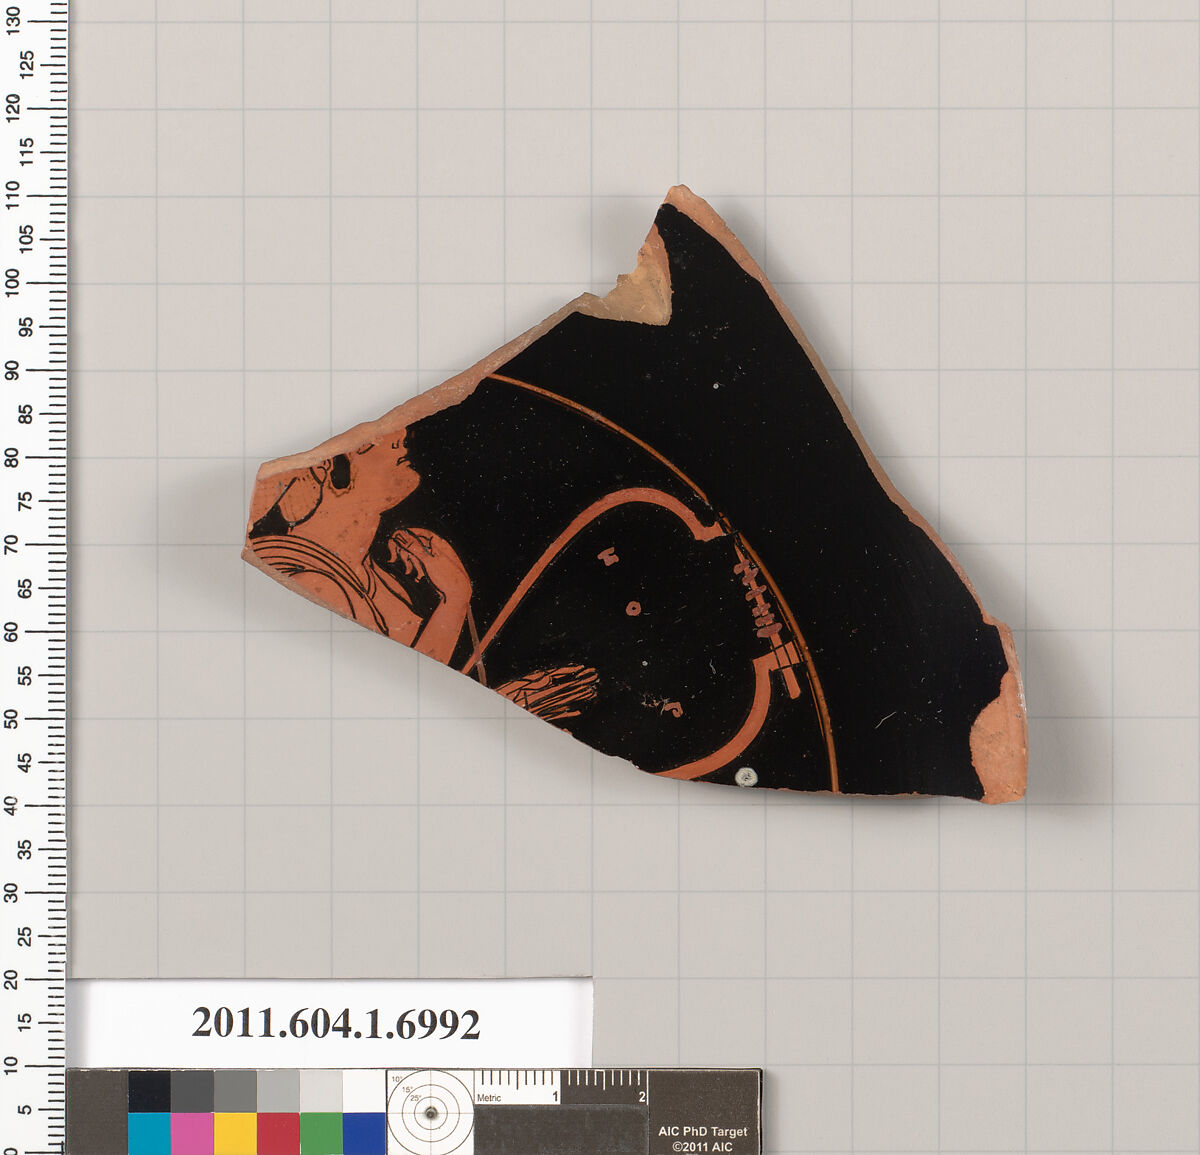 Terracotta fragment of a kylix (drinking cup), Attributed to Douris [Robert Guy], Terracotta, Greek, Attic 